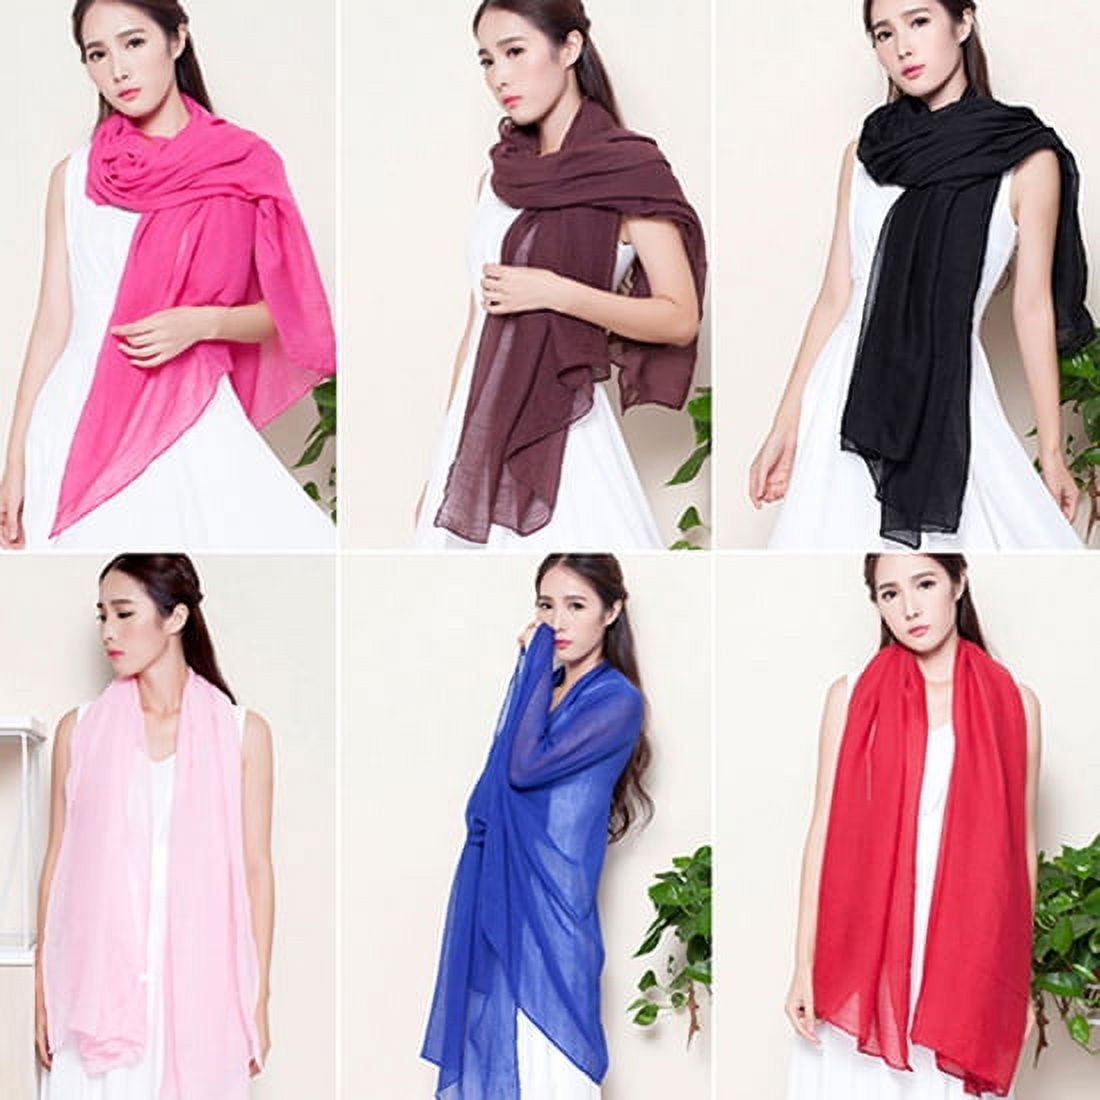 Yesbay Women's Long Cotton Linen Wrap Scarf Shawl Solid Color Stole ...